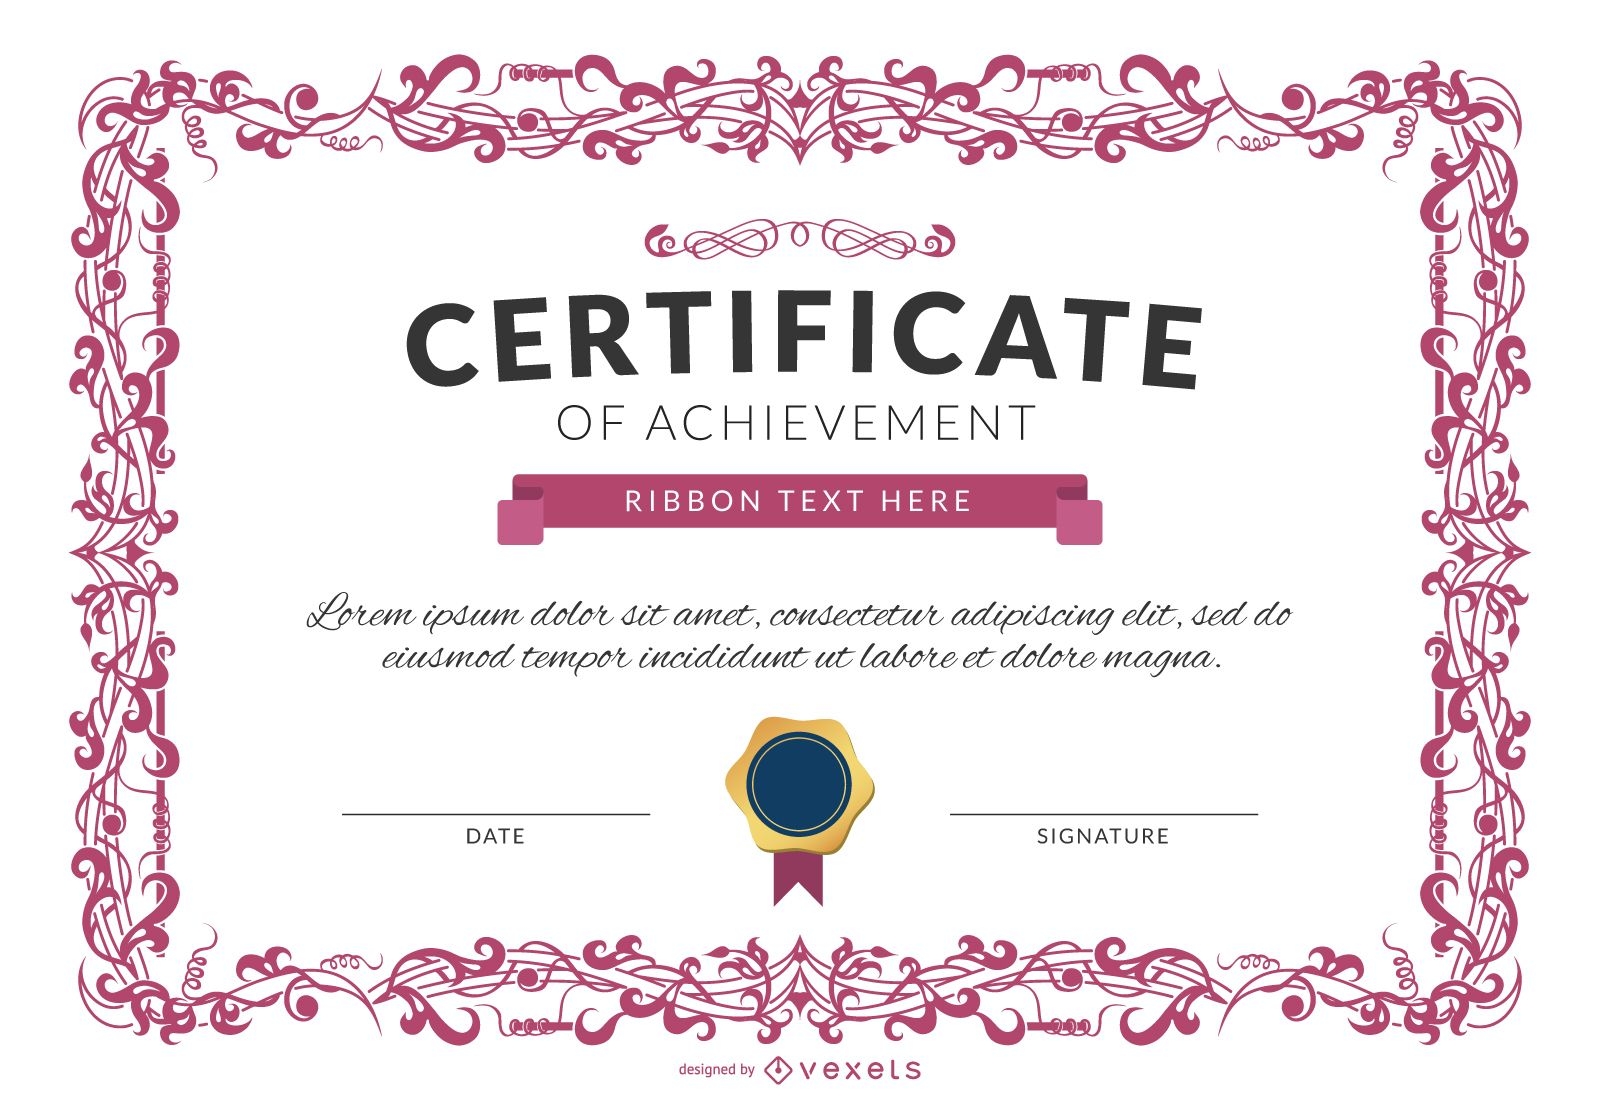 Certificate of achievement template in pink